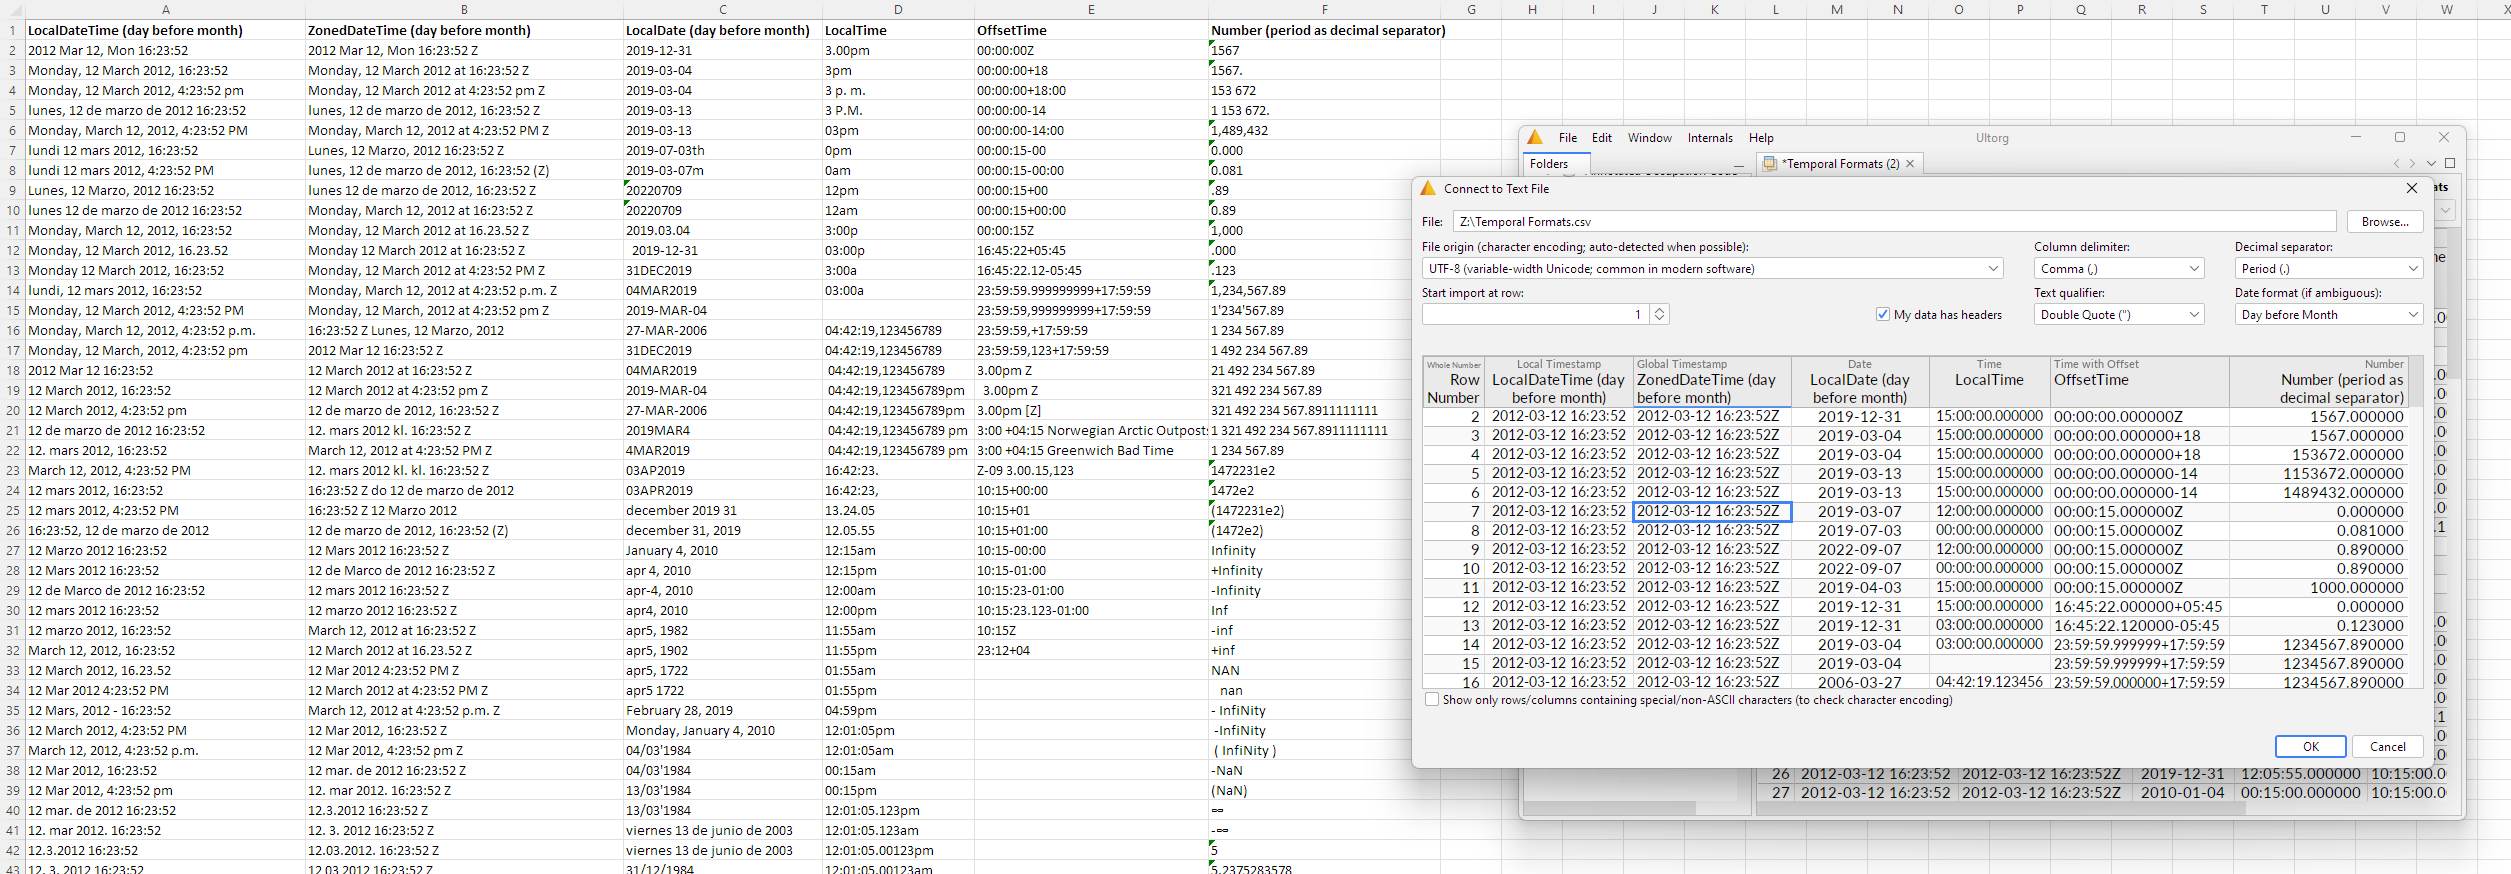 Screenshot of Ultorg parsing a CSV file with many different date and time formats.